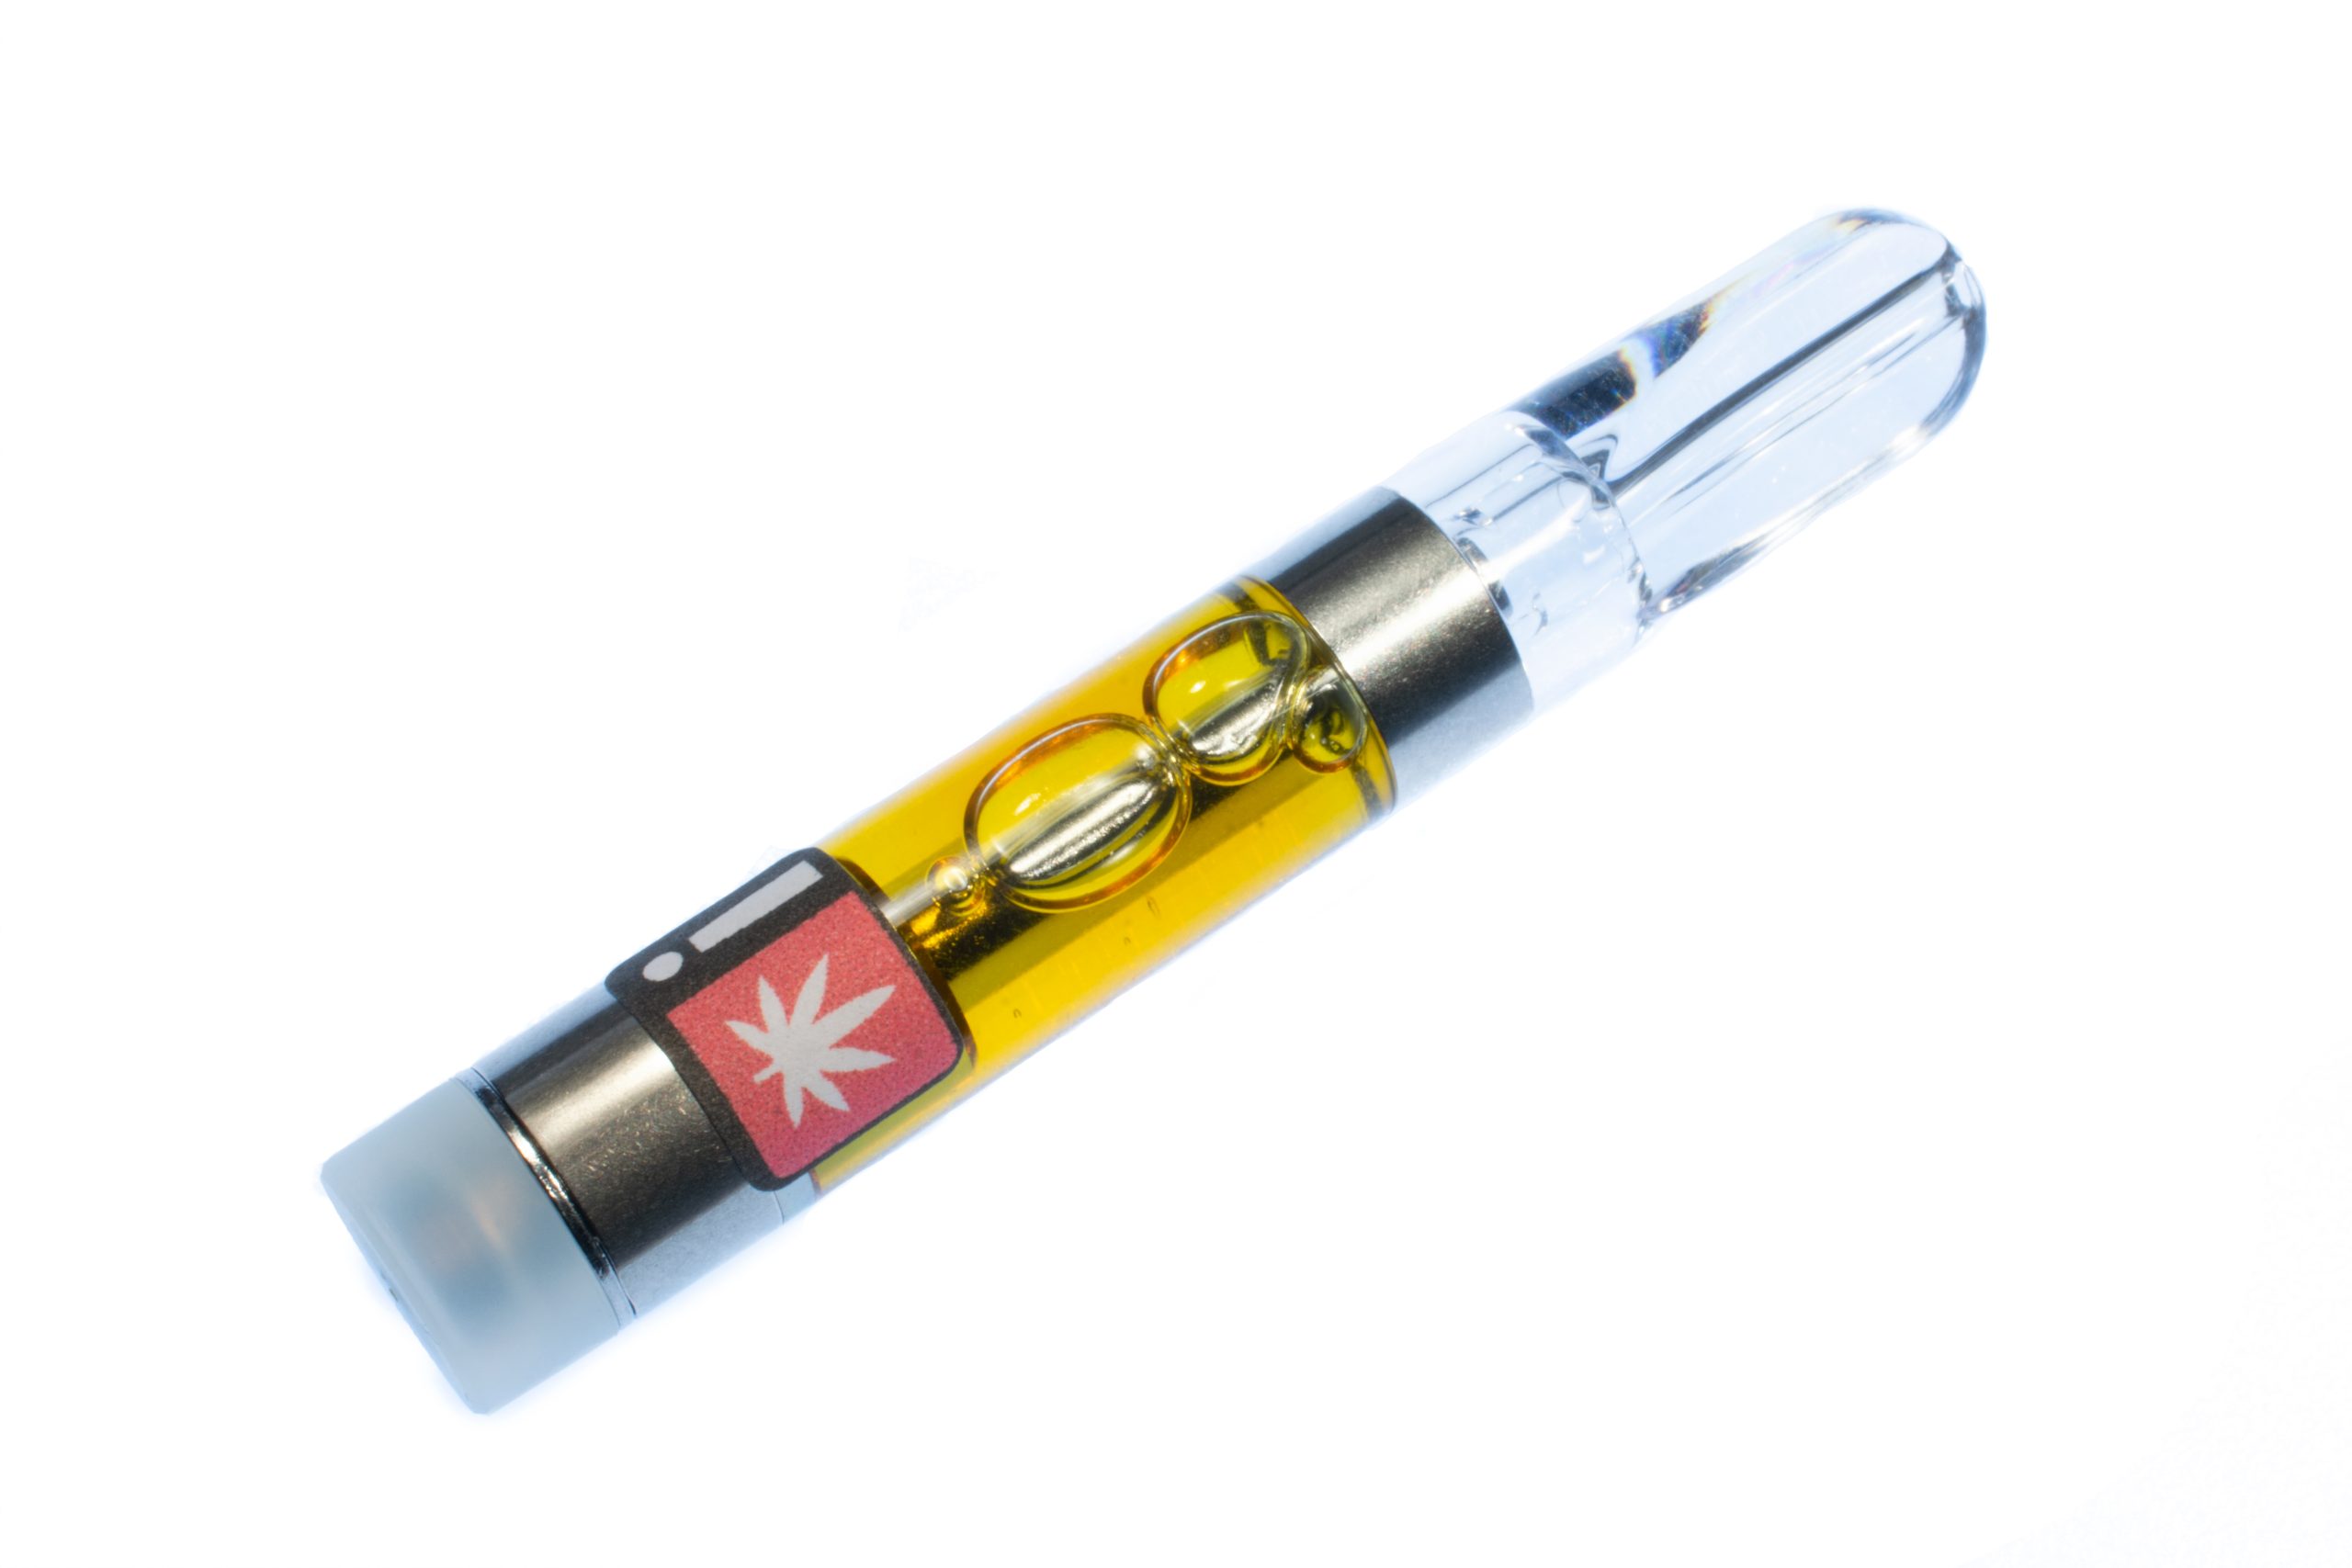 Fake Vape Carts: How To Identify And Avoid Them | Rokin